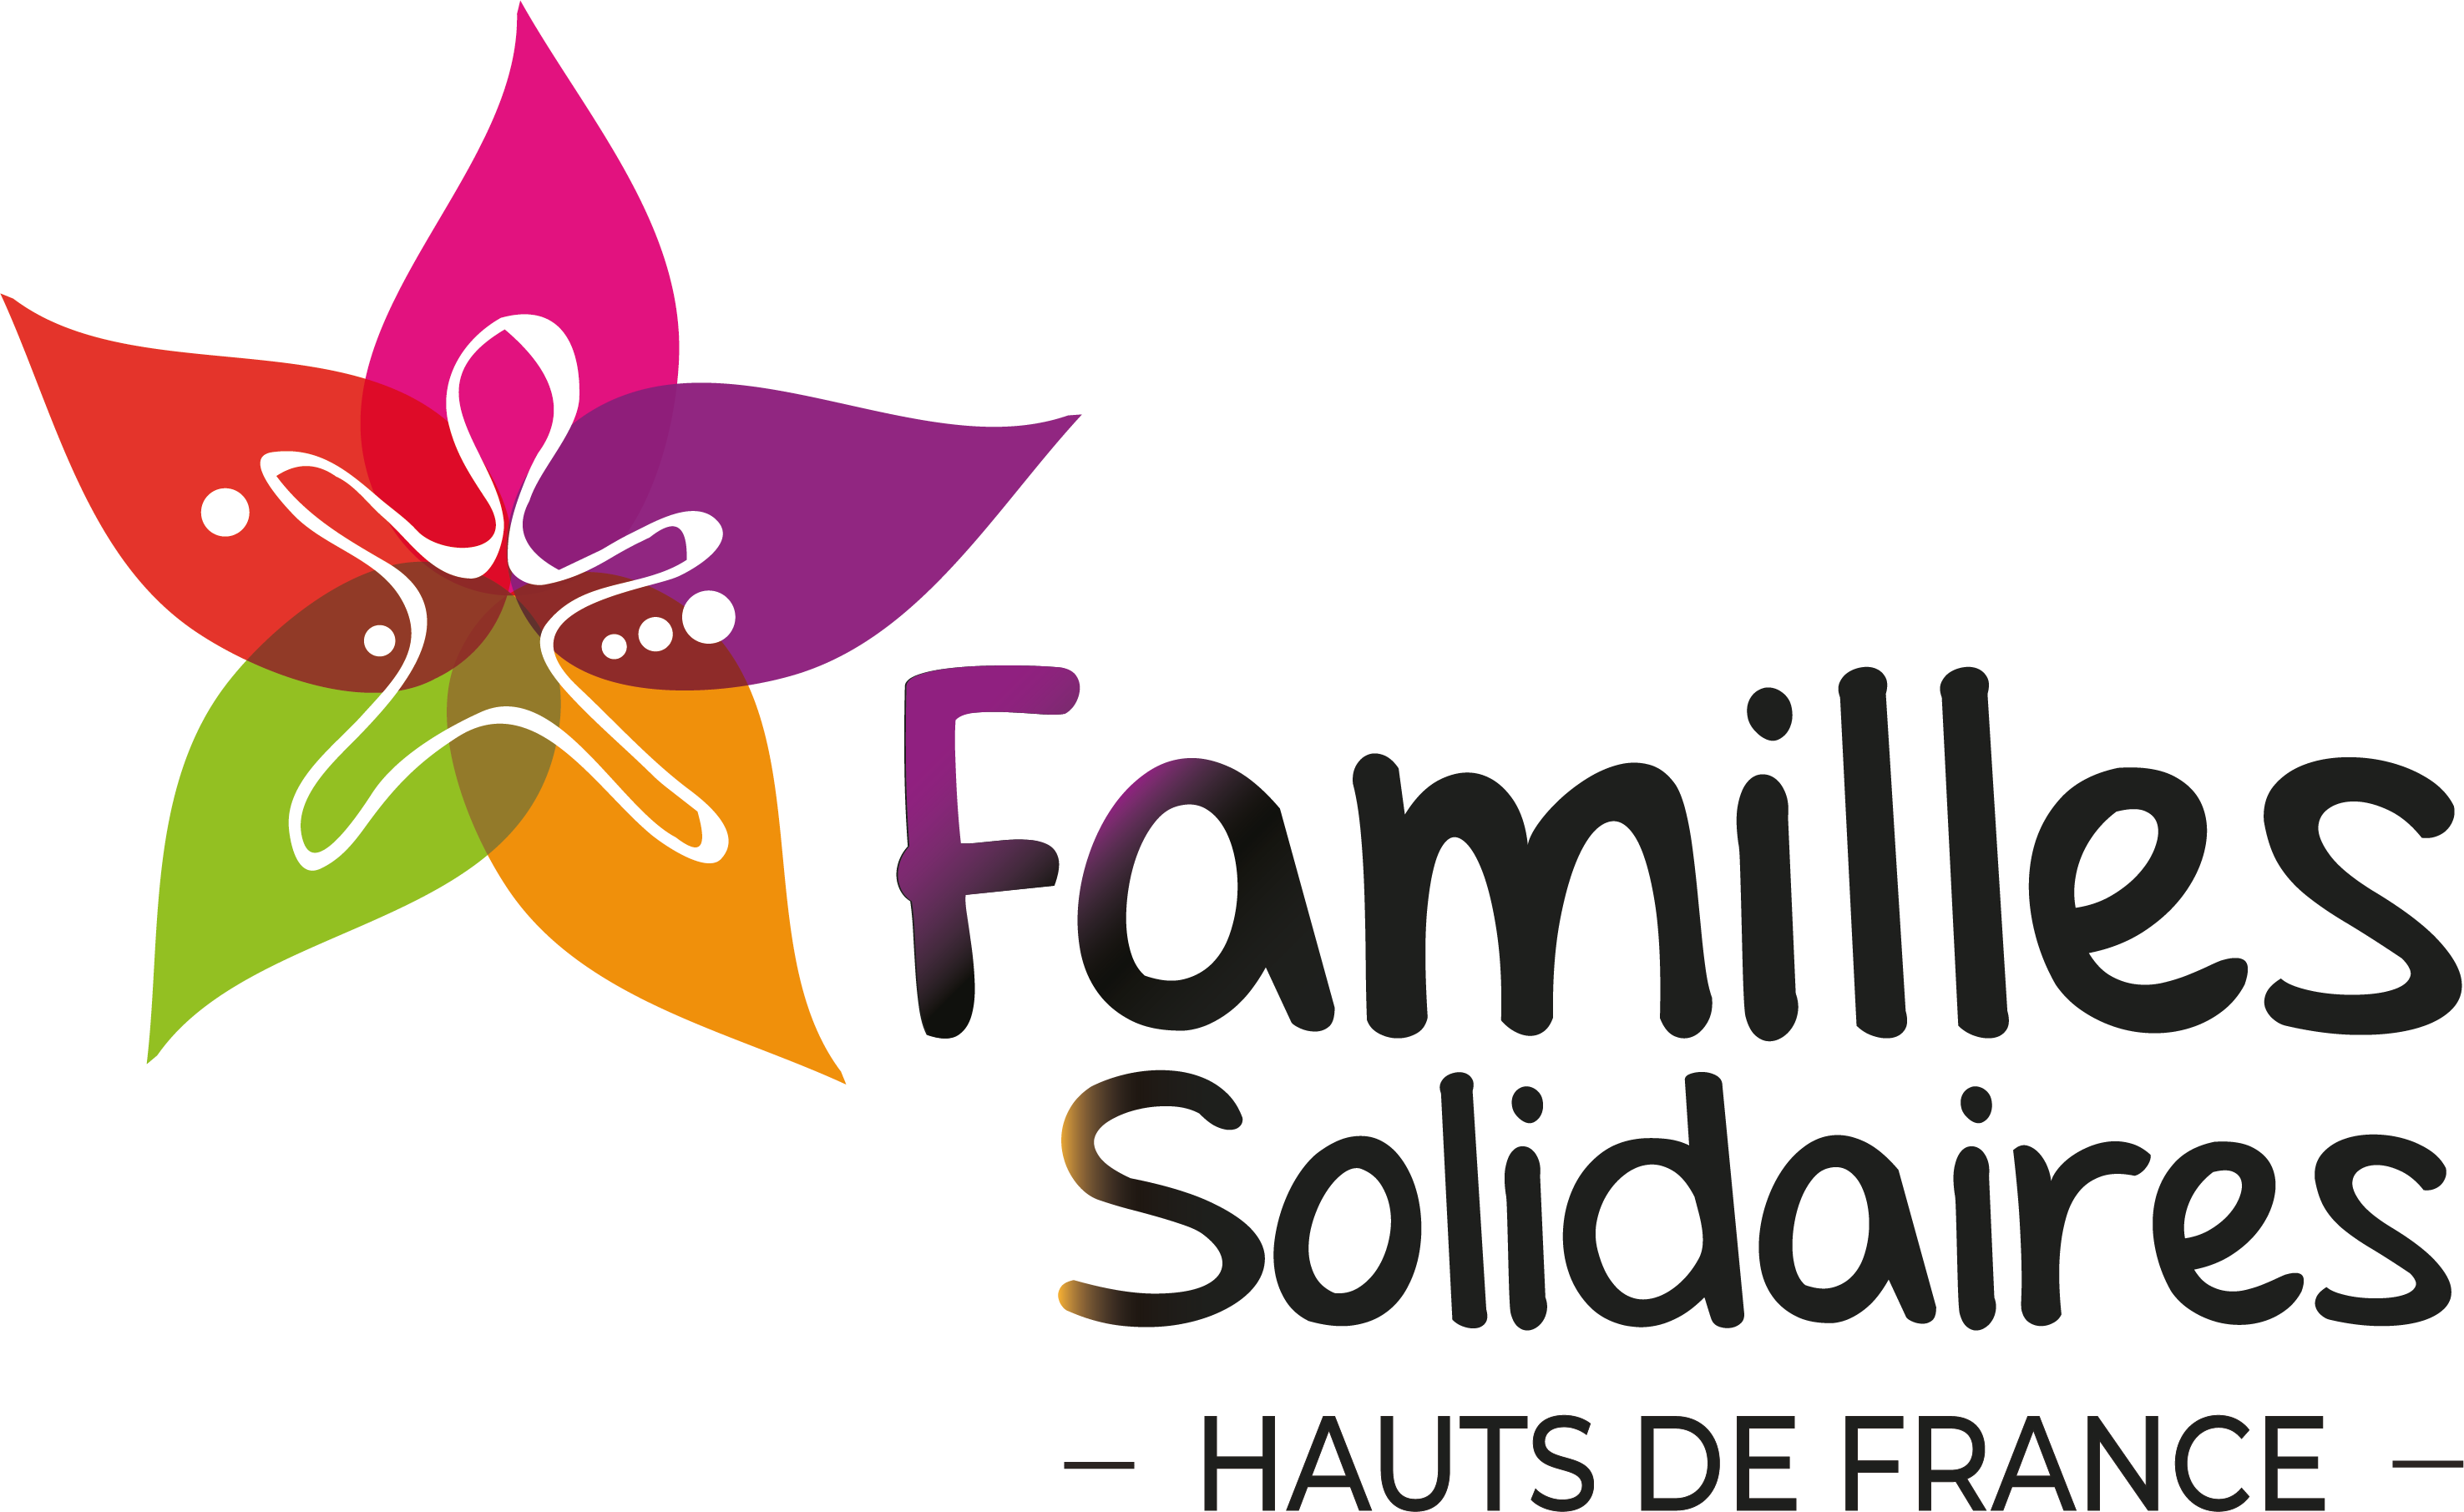 Familles Solidaires